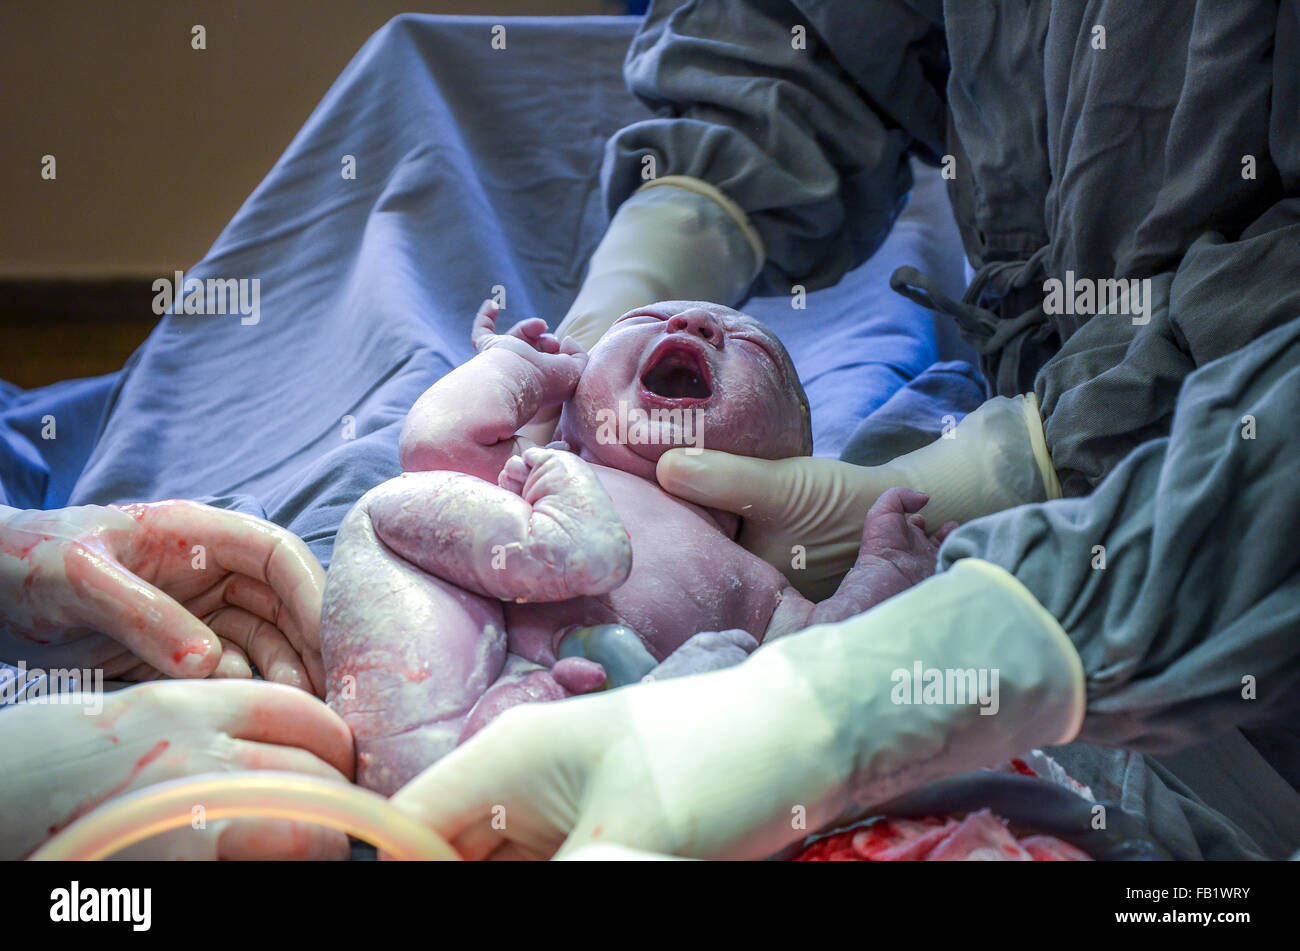 C section. Surgical team performing surgery operation in maternity hospital. Stock Photo